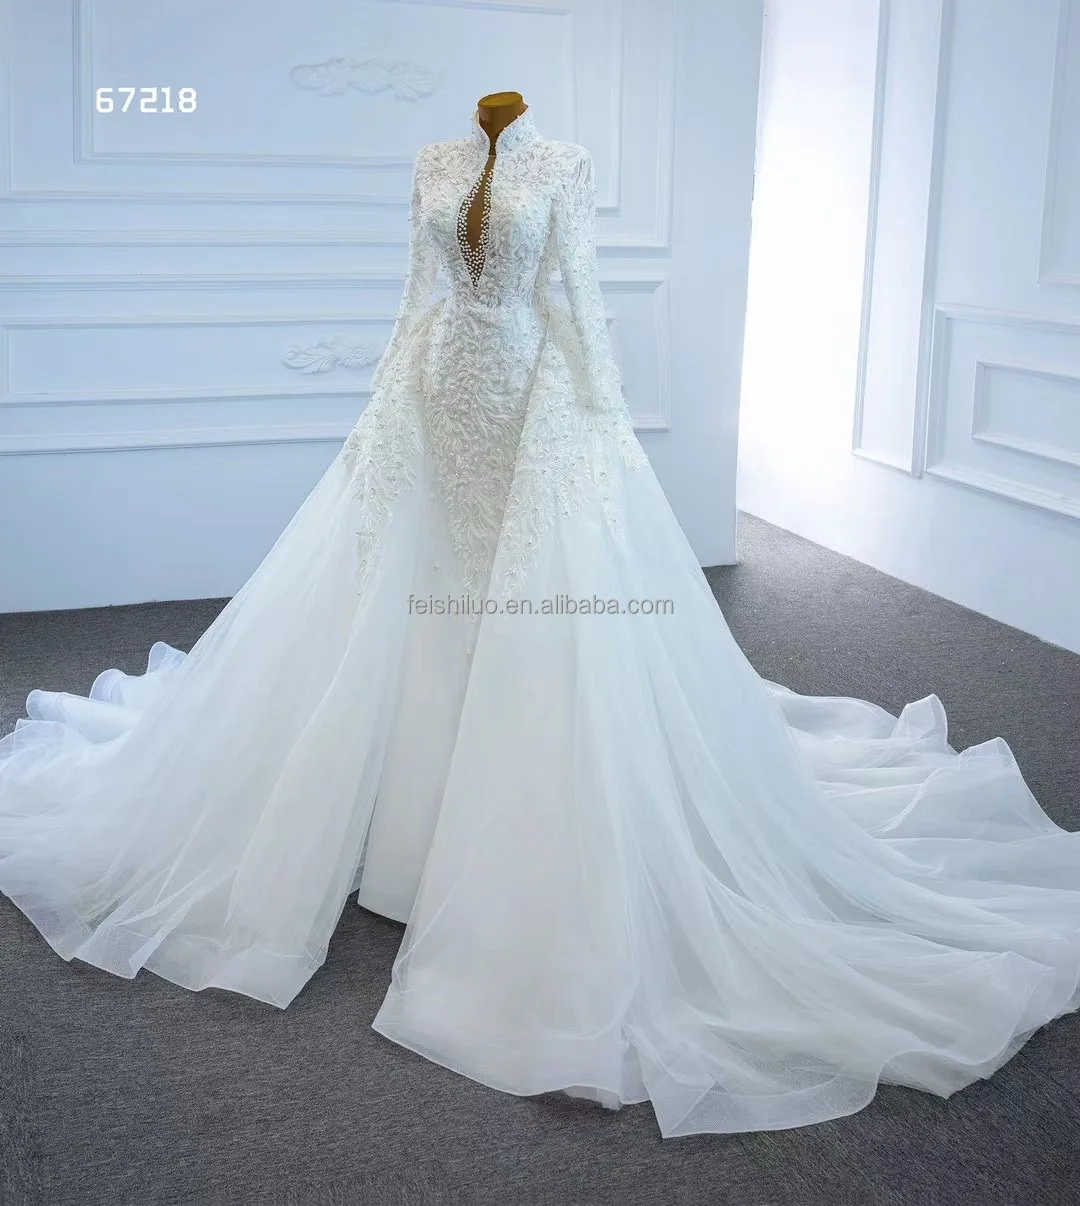 Feishiluo Wholesale Ivory Detachable Train Mermaid Bridal Gowns Dress  Luxury Pear Bead Wedding Dress For Women Ball Gown - Buy Bridal Chic Wedding  Dresses Detachable Train Bridal Gowns,Women Ball Gown Russian Wedding